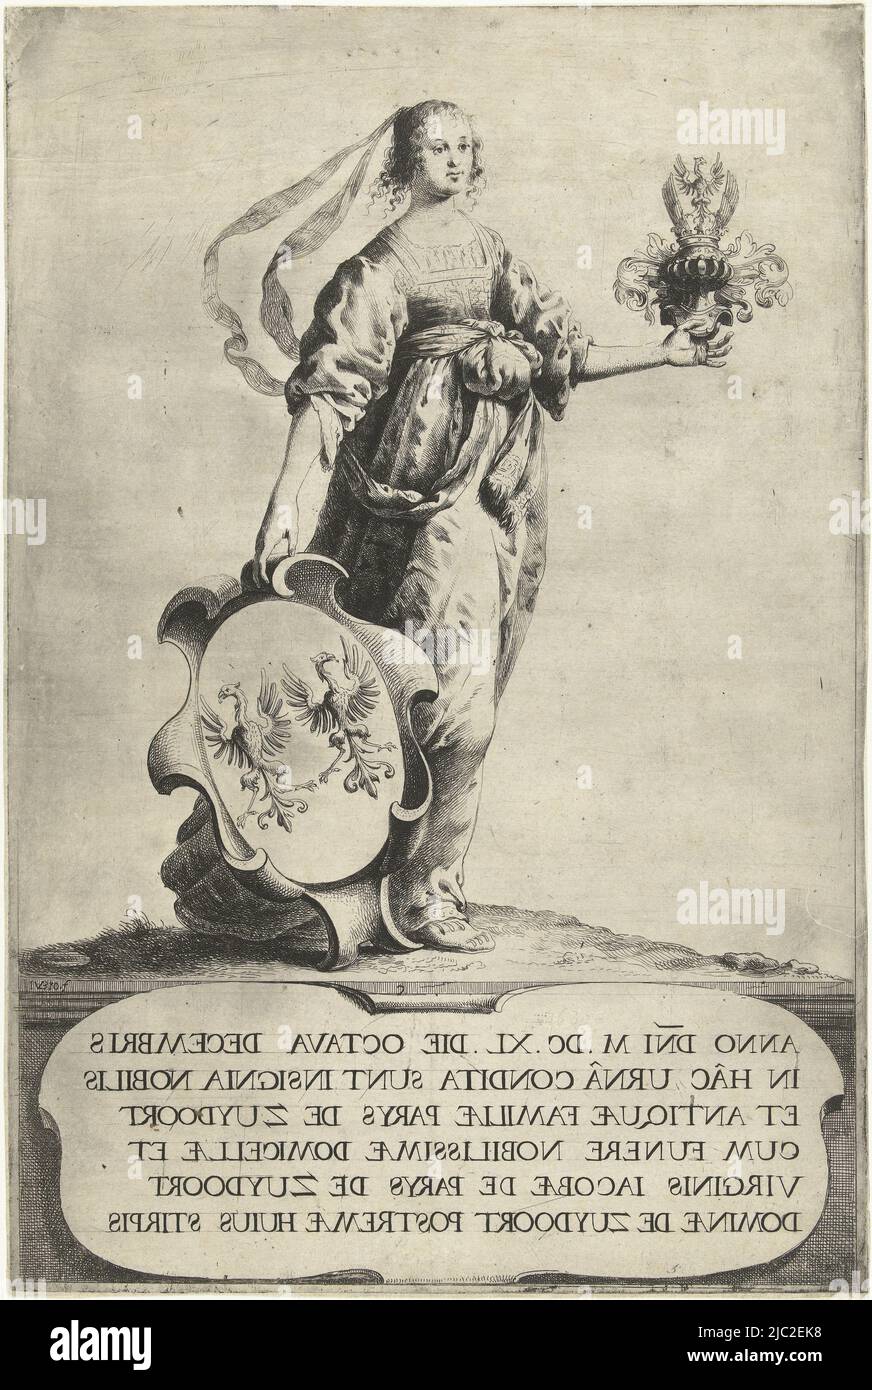 Woman standing with coat of arms with coat of arms of family Van Parijs van Zuidoort and decorated helmet. On a cartouche there are six lines of Latin text in mirror writing which includes this family name, Woman standing with coat of arms with coat of arms of the Van Parijs van Zuidoort family and decorated helmet, print maker: Jan Gerritsz. van Bronckhorst, (mentioned on object), Netherlands, 1640, paper, engraving, h 312 mm × w 208 mm Stock Photo